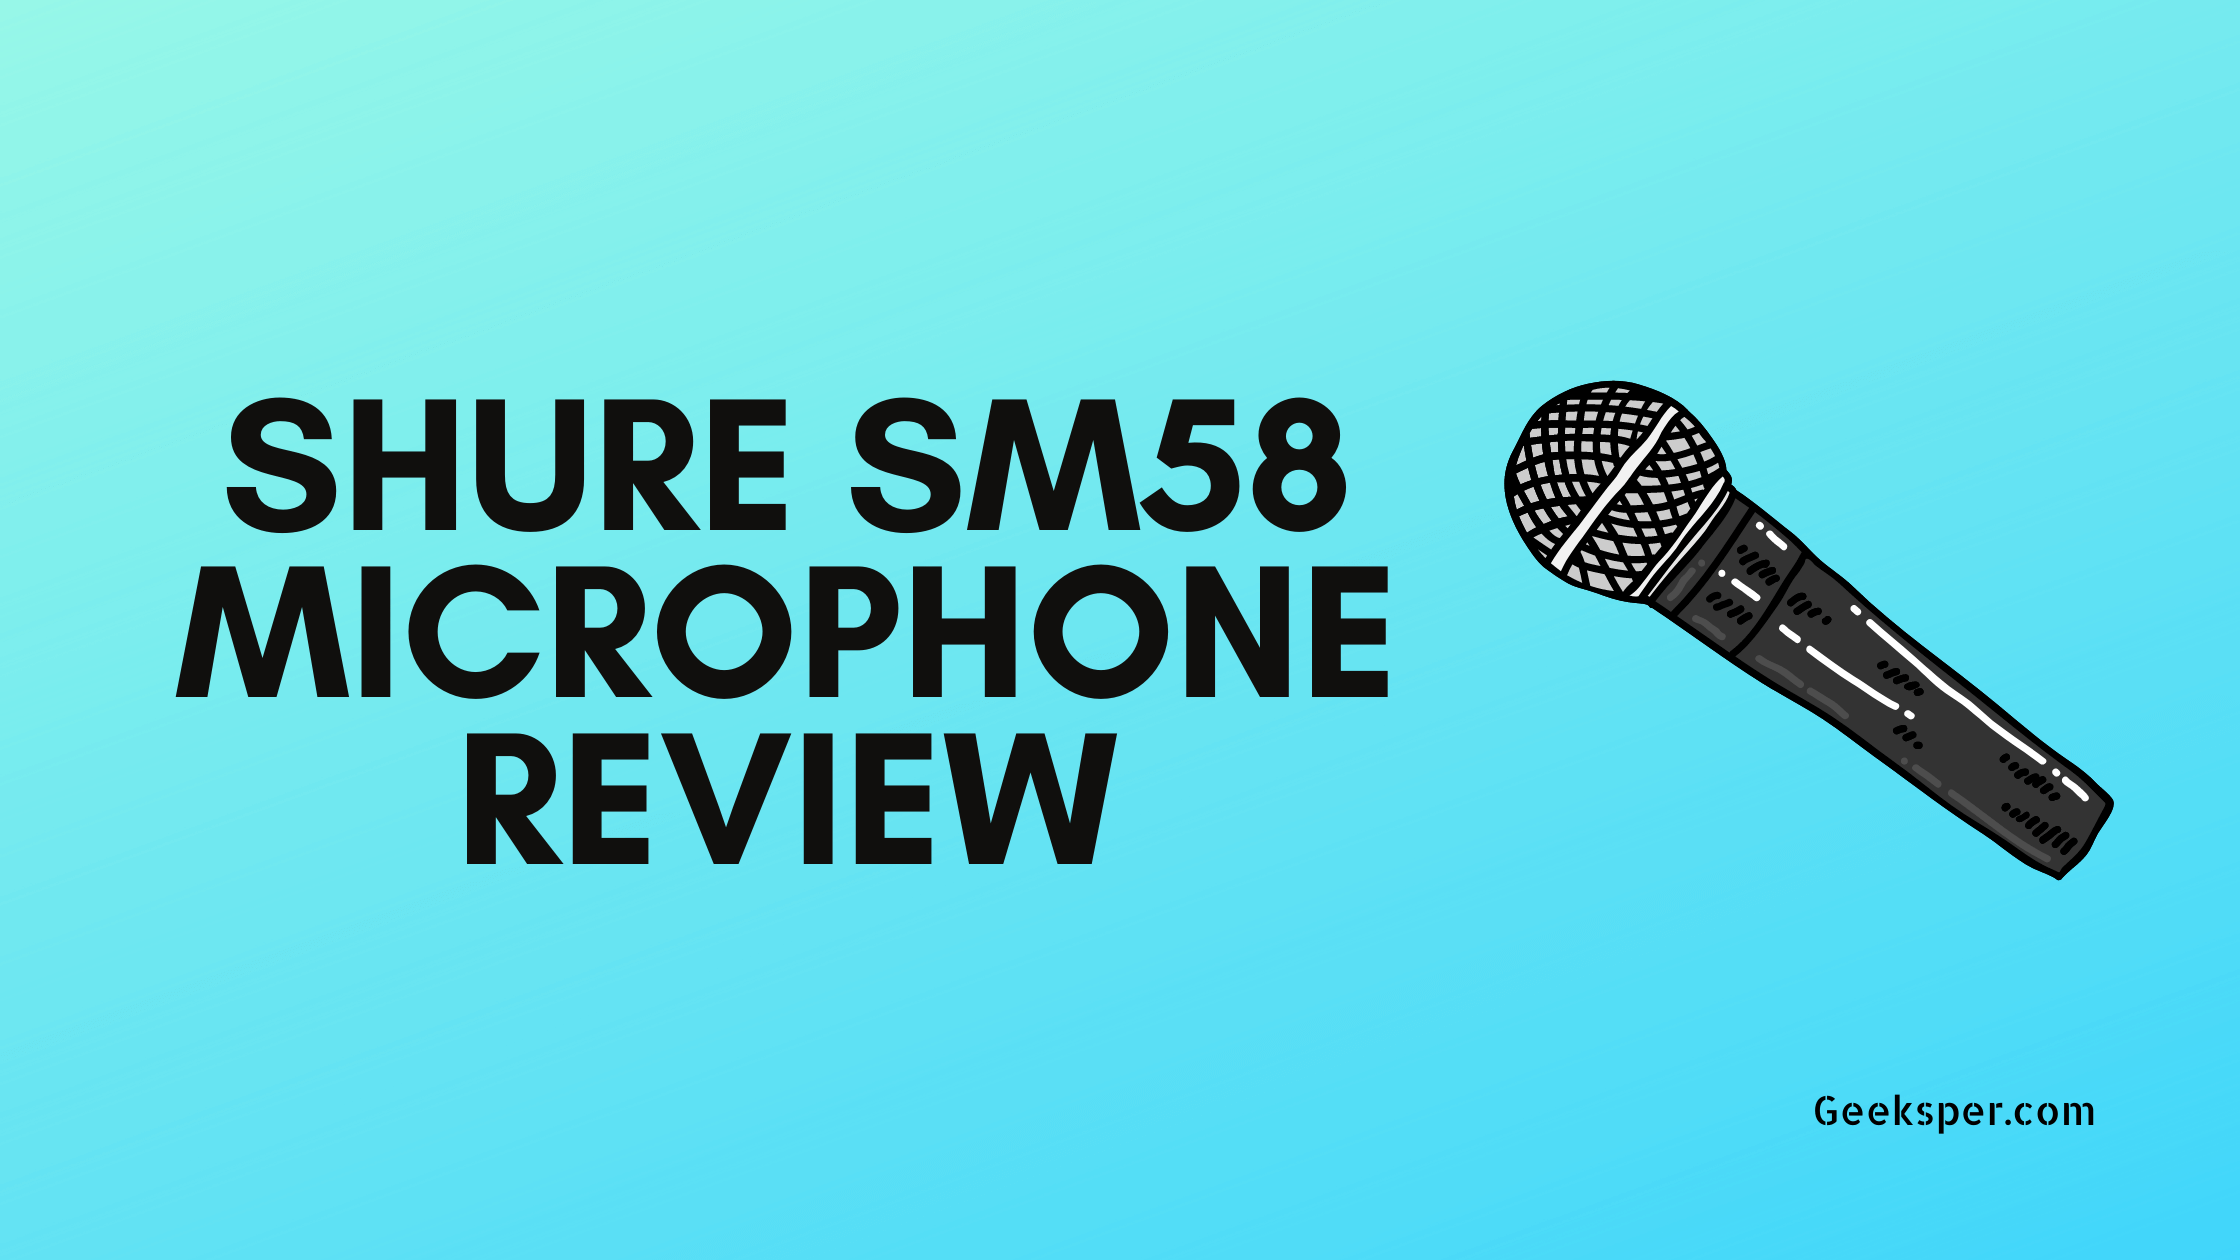 Shure SM58 MIcrophone Review